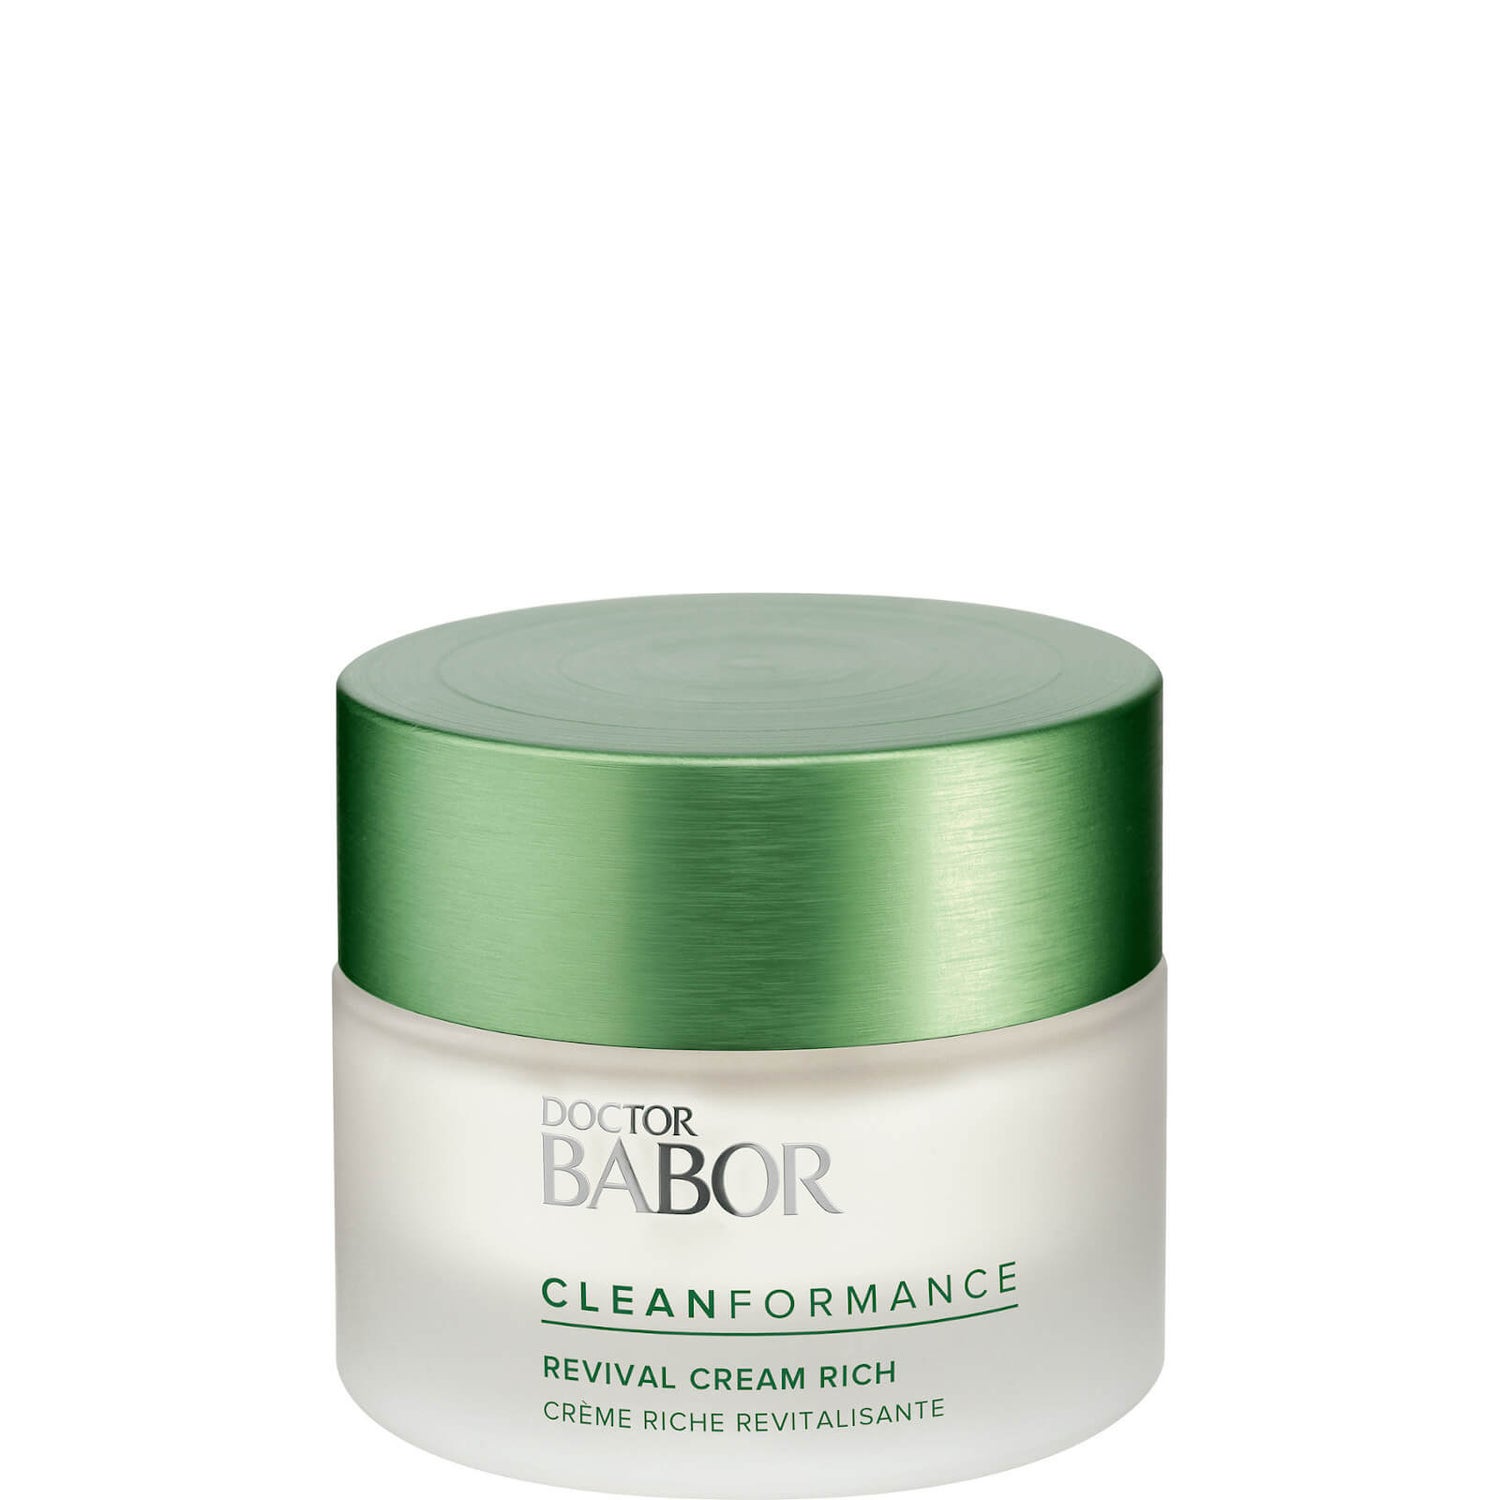 BABOR Doctor Babor Cleanformance Revival Cream Rich (50 ml.)